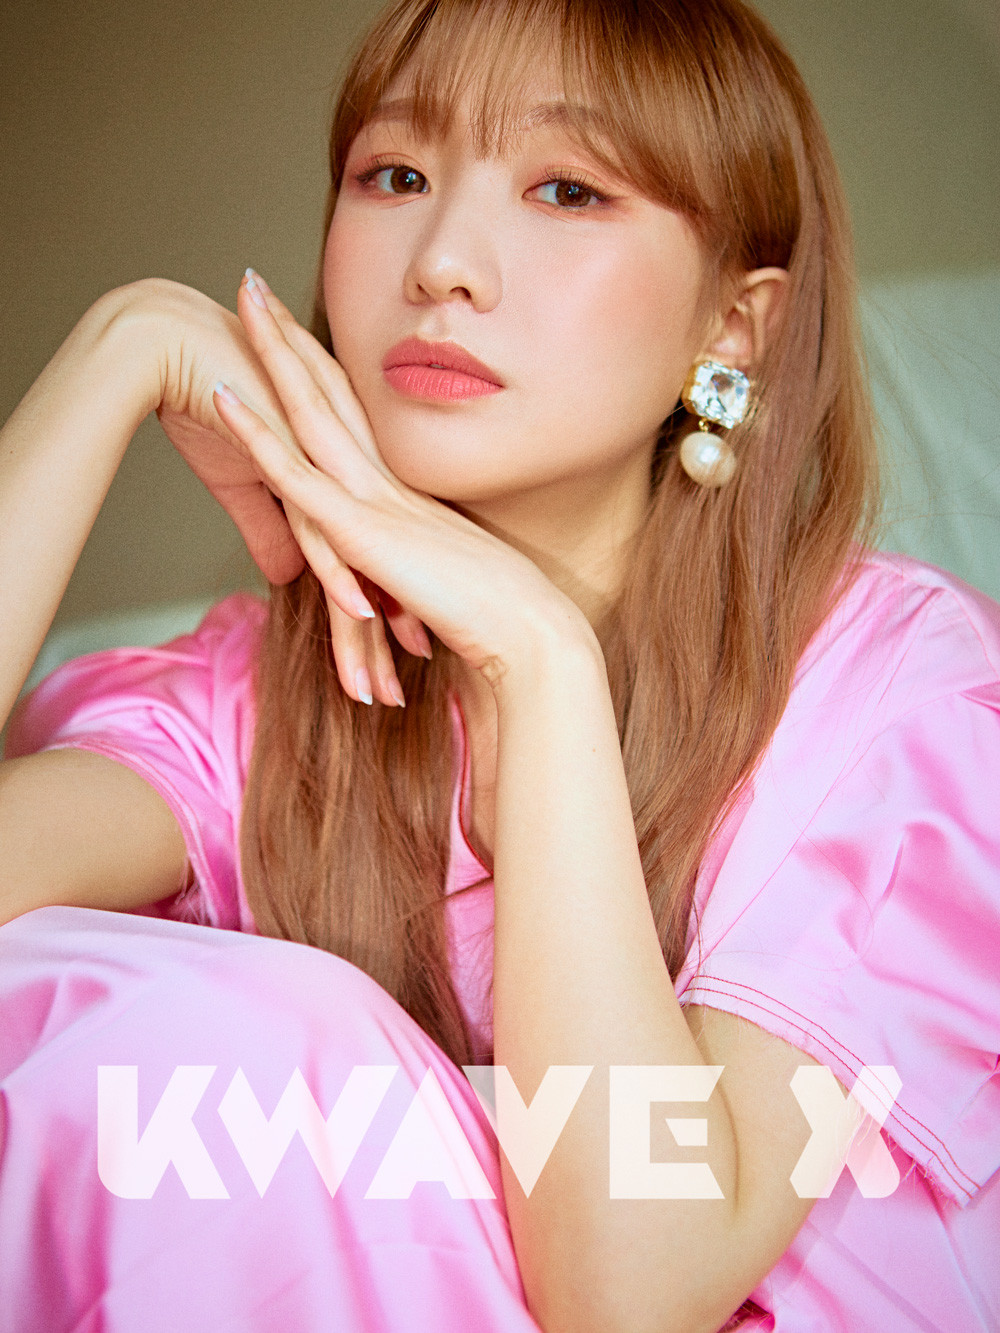 lovelyz-ryu-soo-jung-jeong-ye-in-stay-home-in-pictorial-with-kwave-x-4